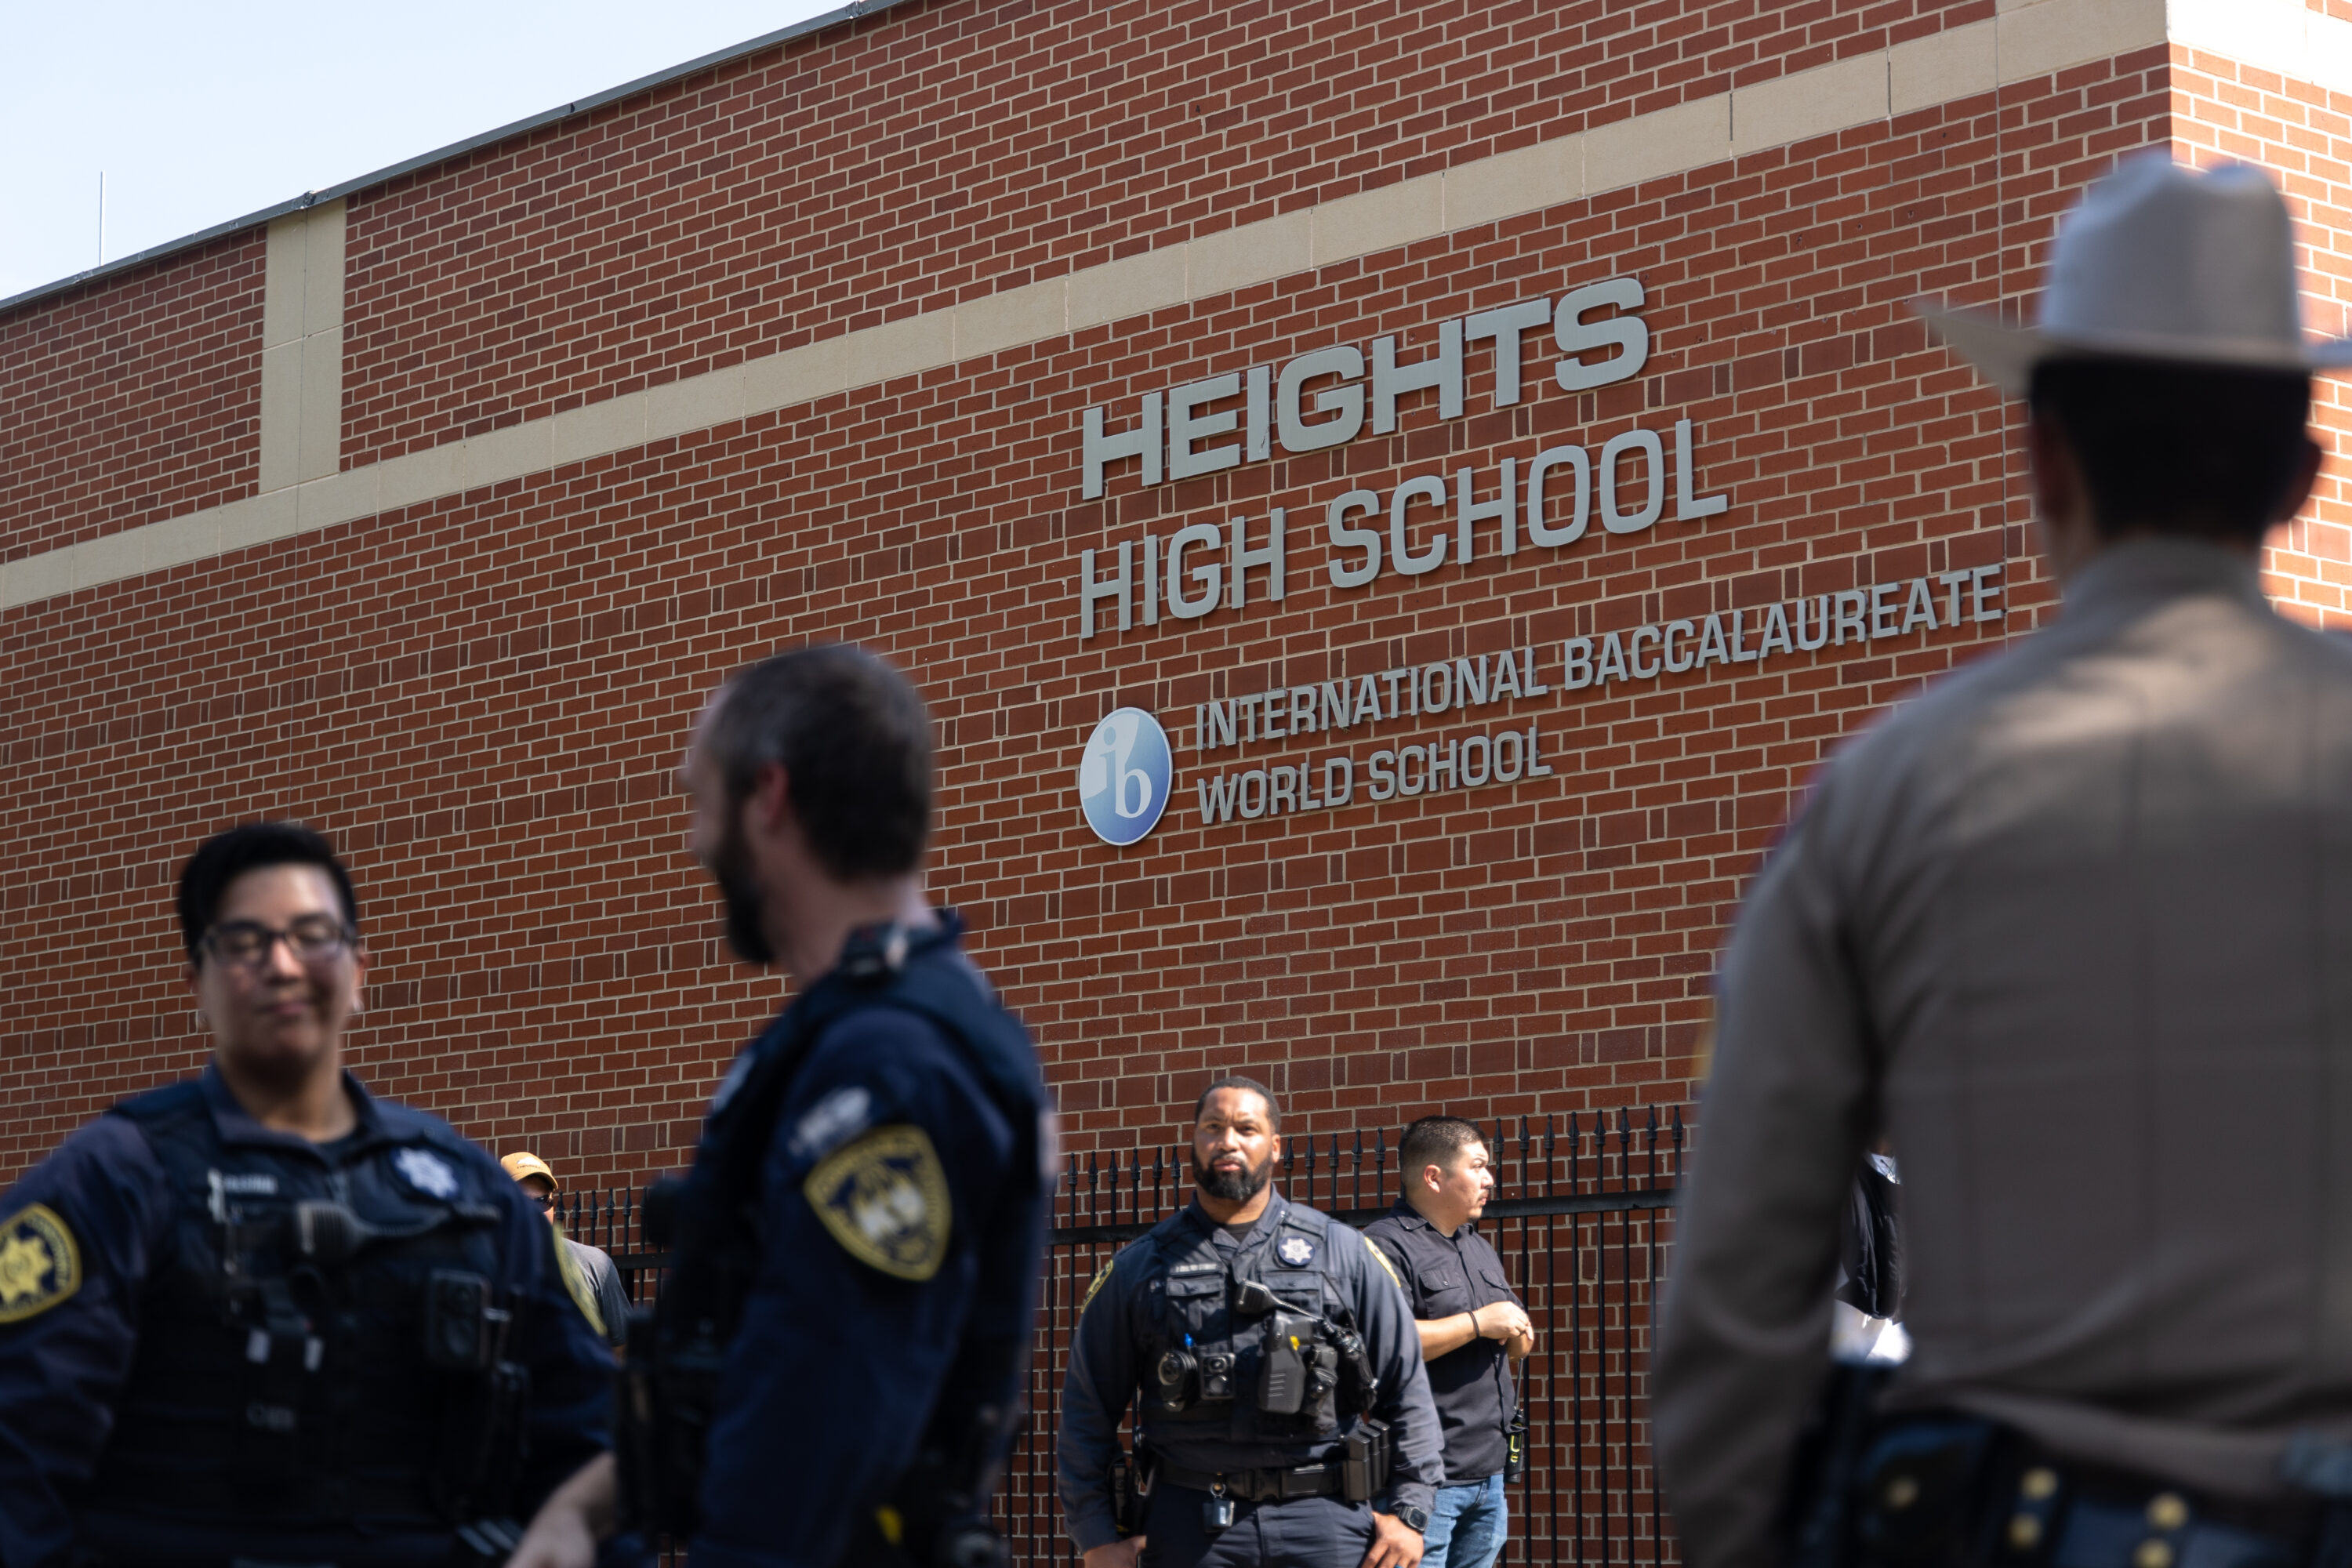 False active shooter reports made at multiple Texas schools